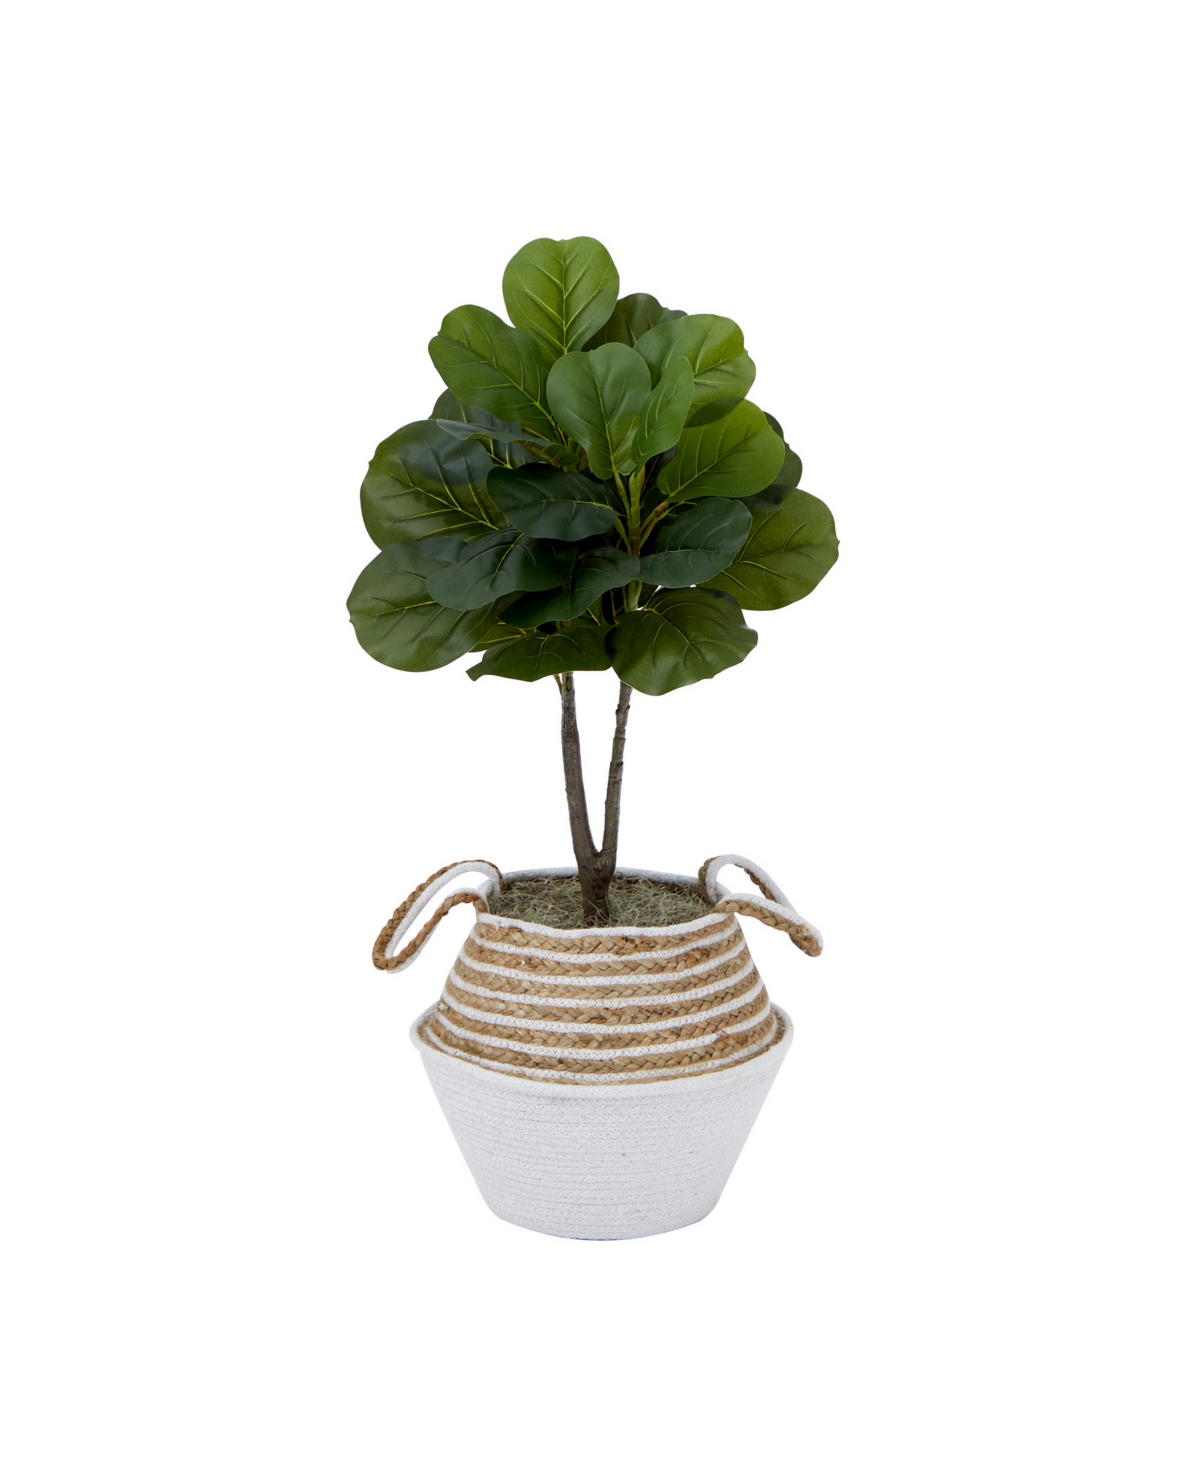 Artificial Fiddle 3' Leaf Fig Tree with Handmade Cotton Jute Woven Basket Diy Kit - Cream